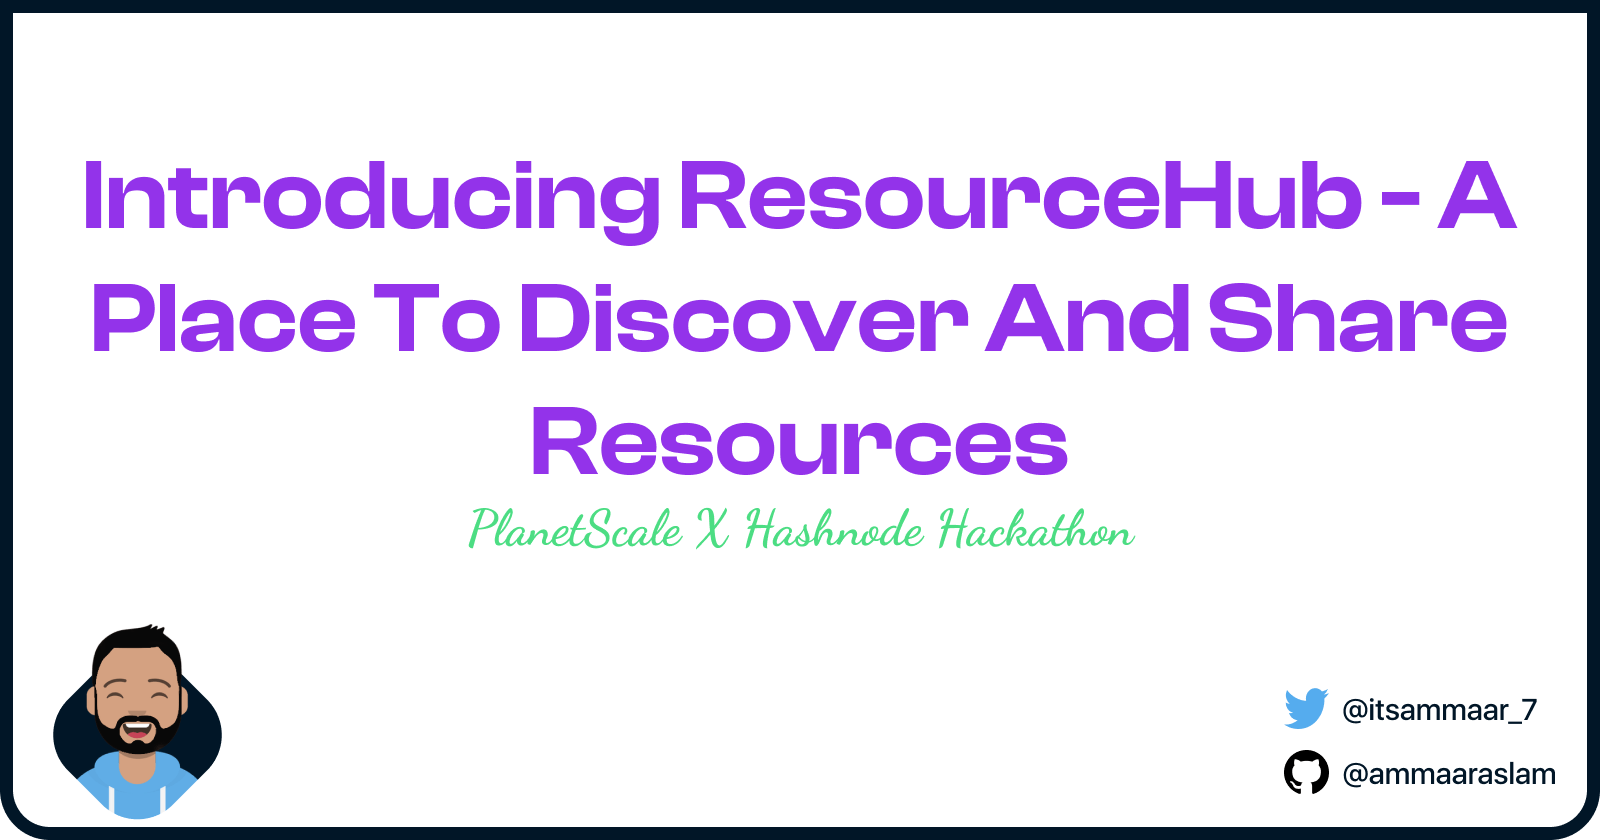 Introducing ResourceHub - A Place To Discover And Share Resources